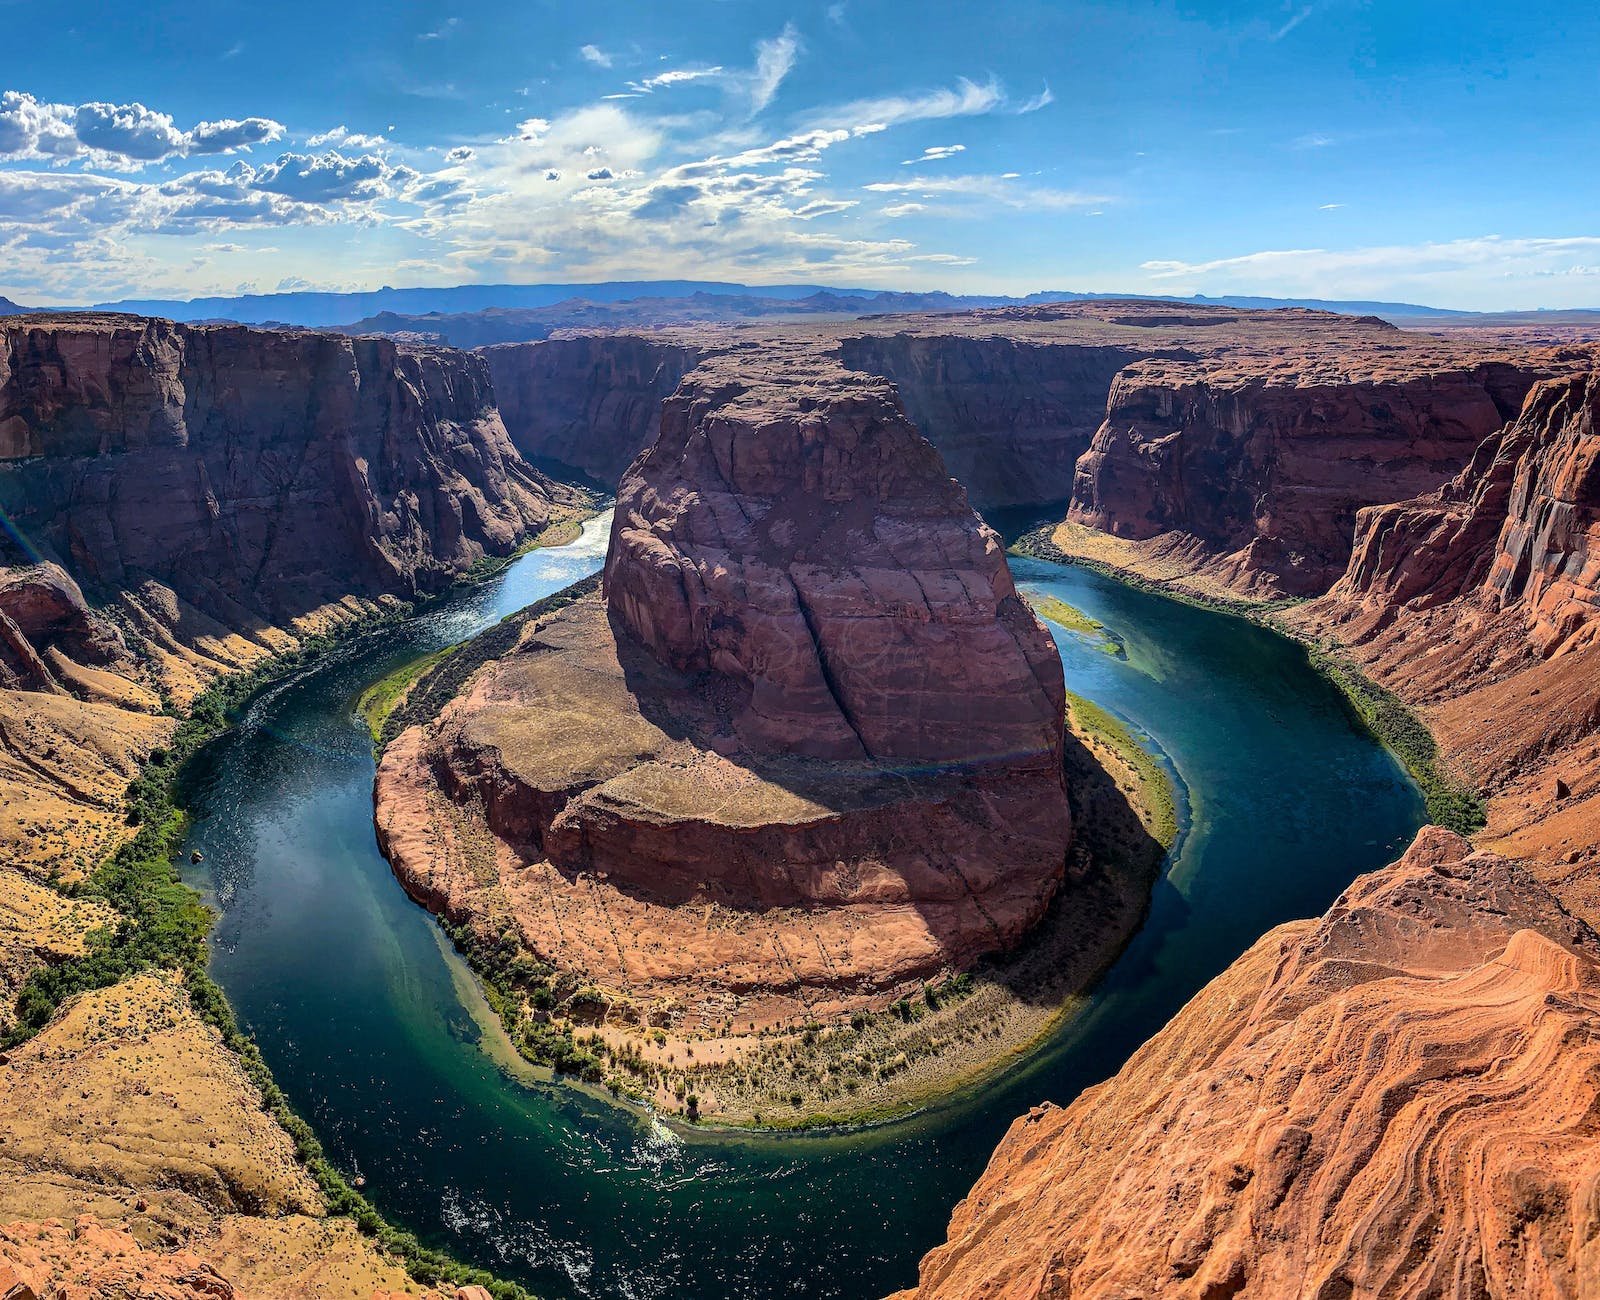 horseshoe shaped meander in colorado river - Grand Canyon, United States